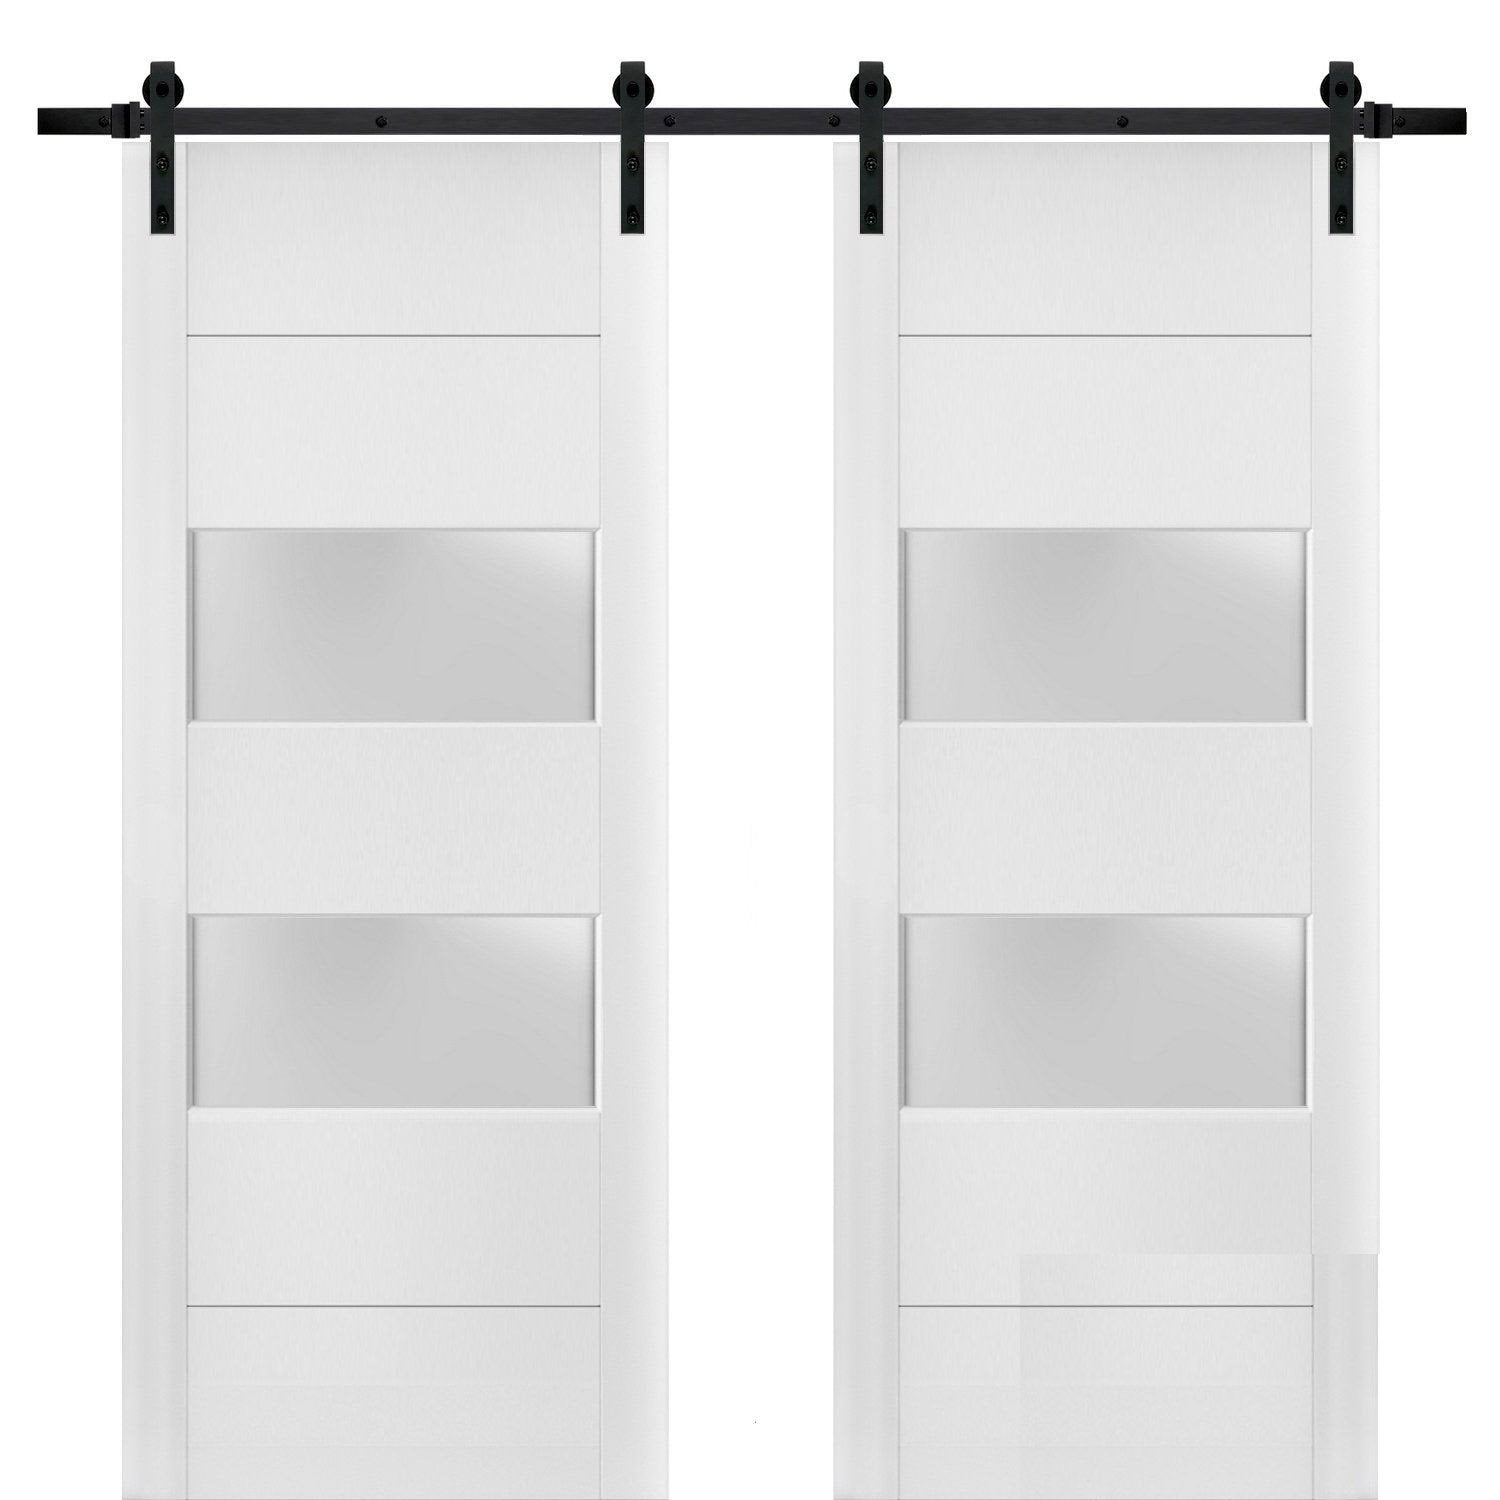 Lucia 4010 White Silk Double Barn Door with 2 Lites Frosted Glass | Black Rail